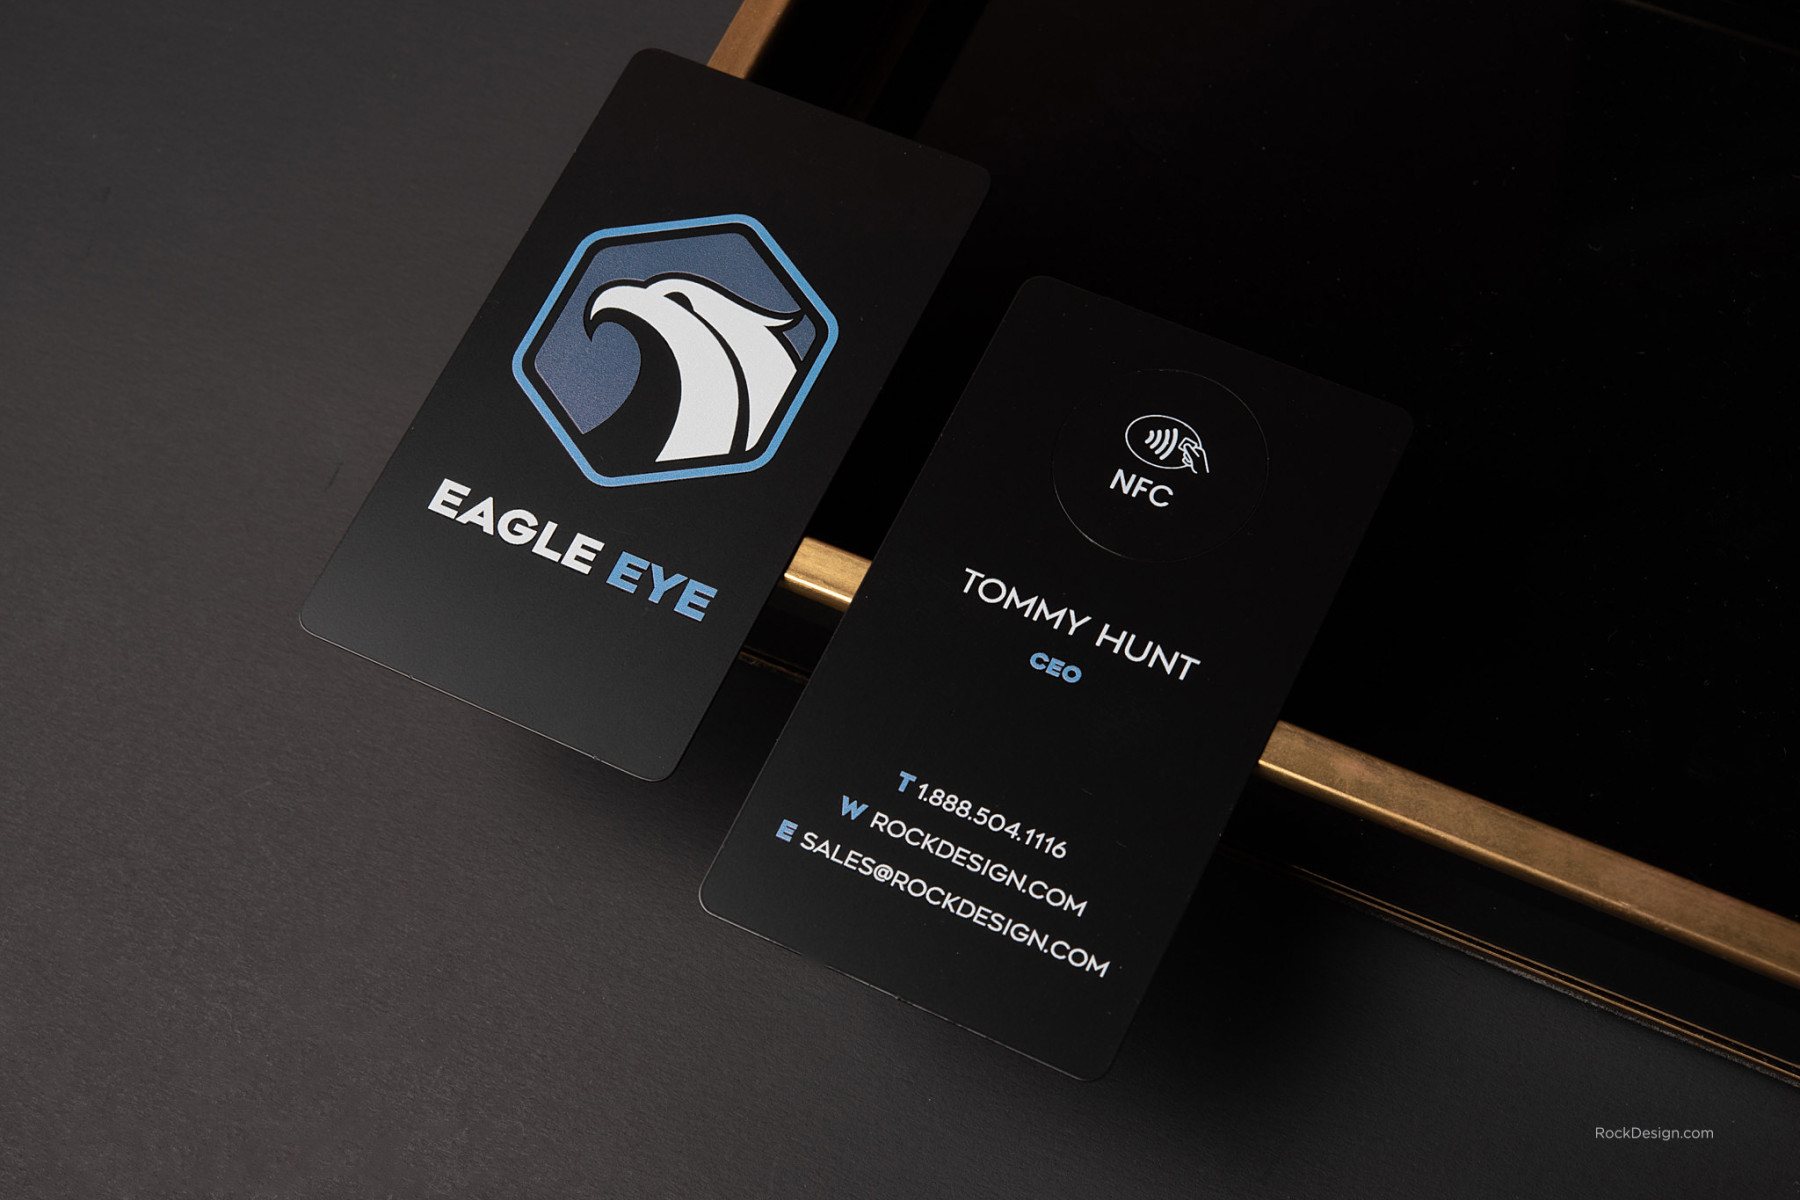 Gift Card for Digital NFC Business Cards, Unique NFC Products